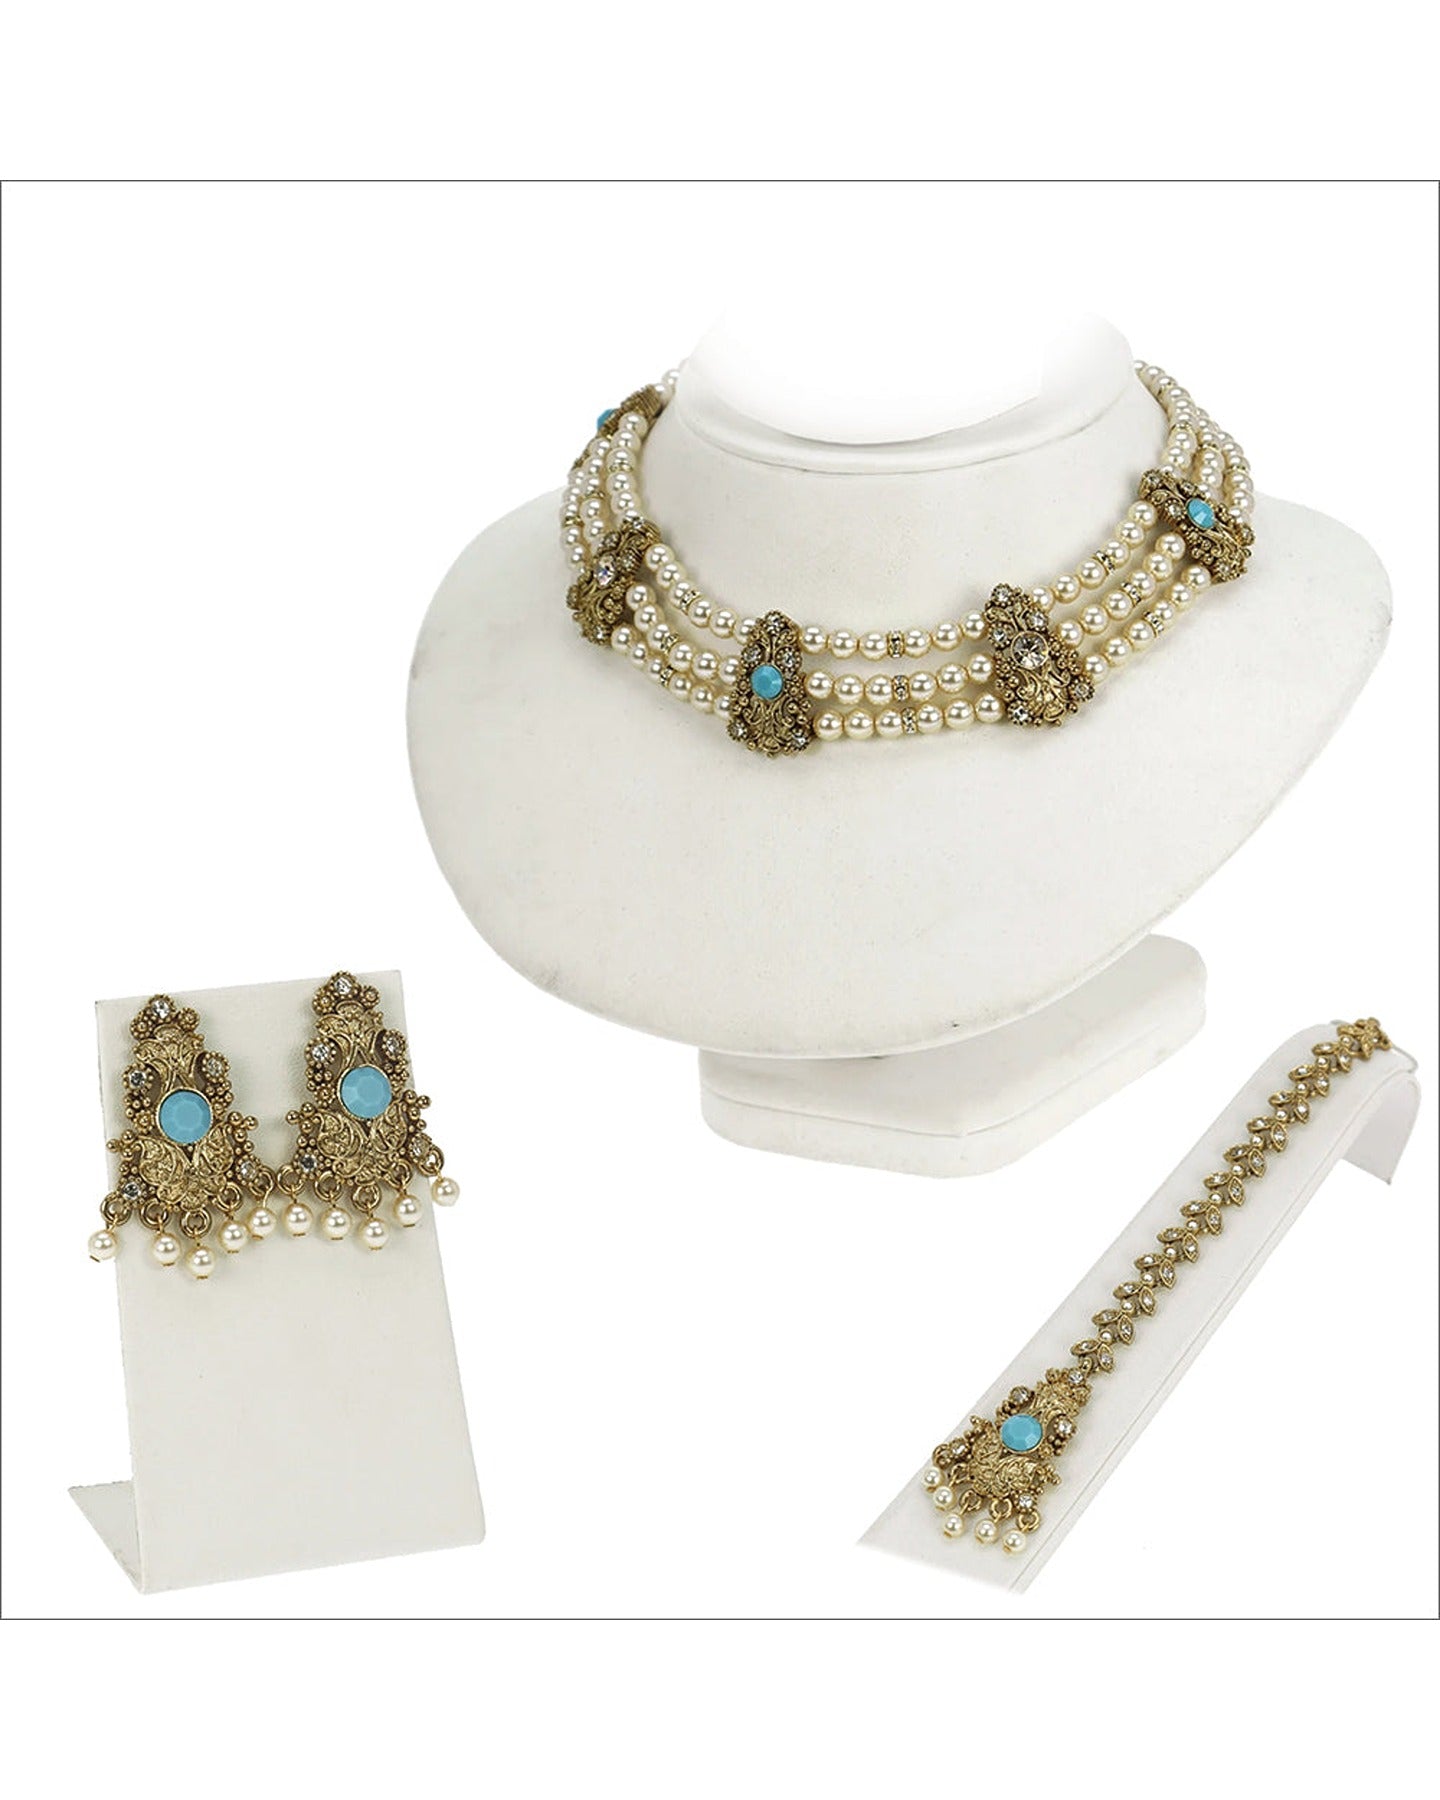 Antique Gold Jewelry with Turquoise and Crystal Accents